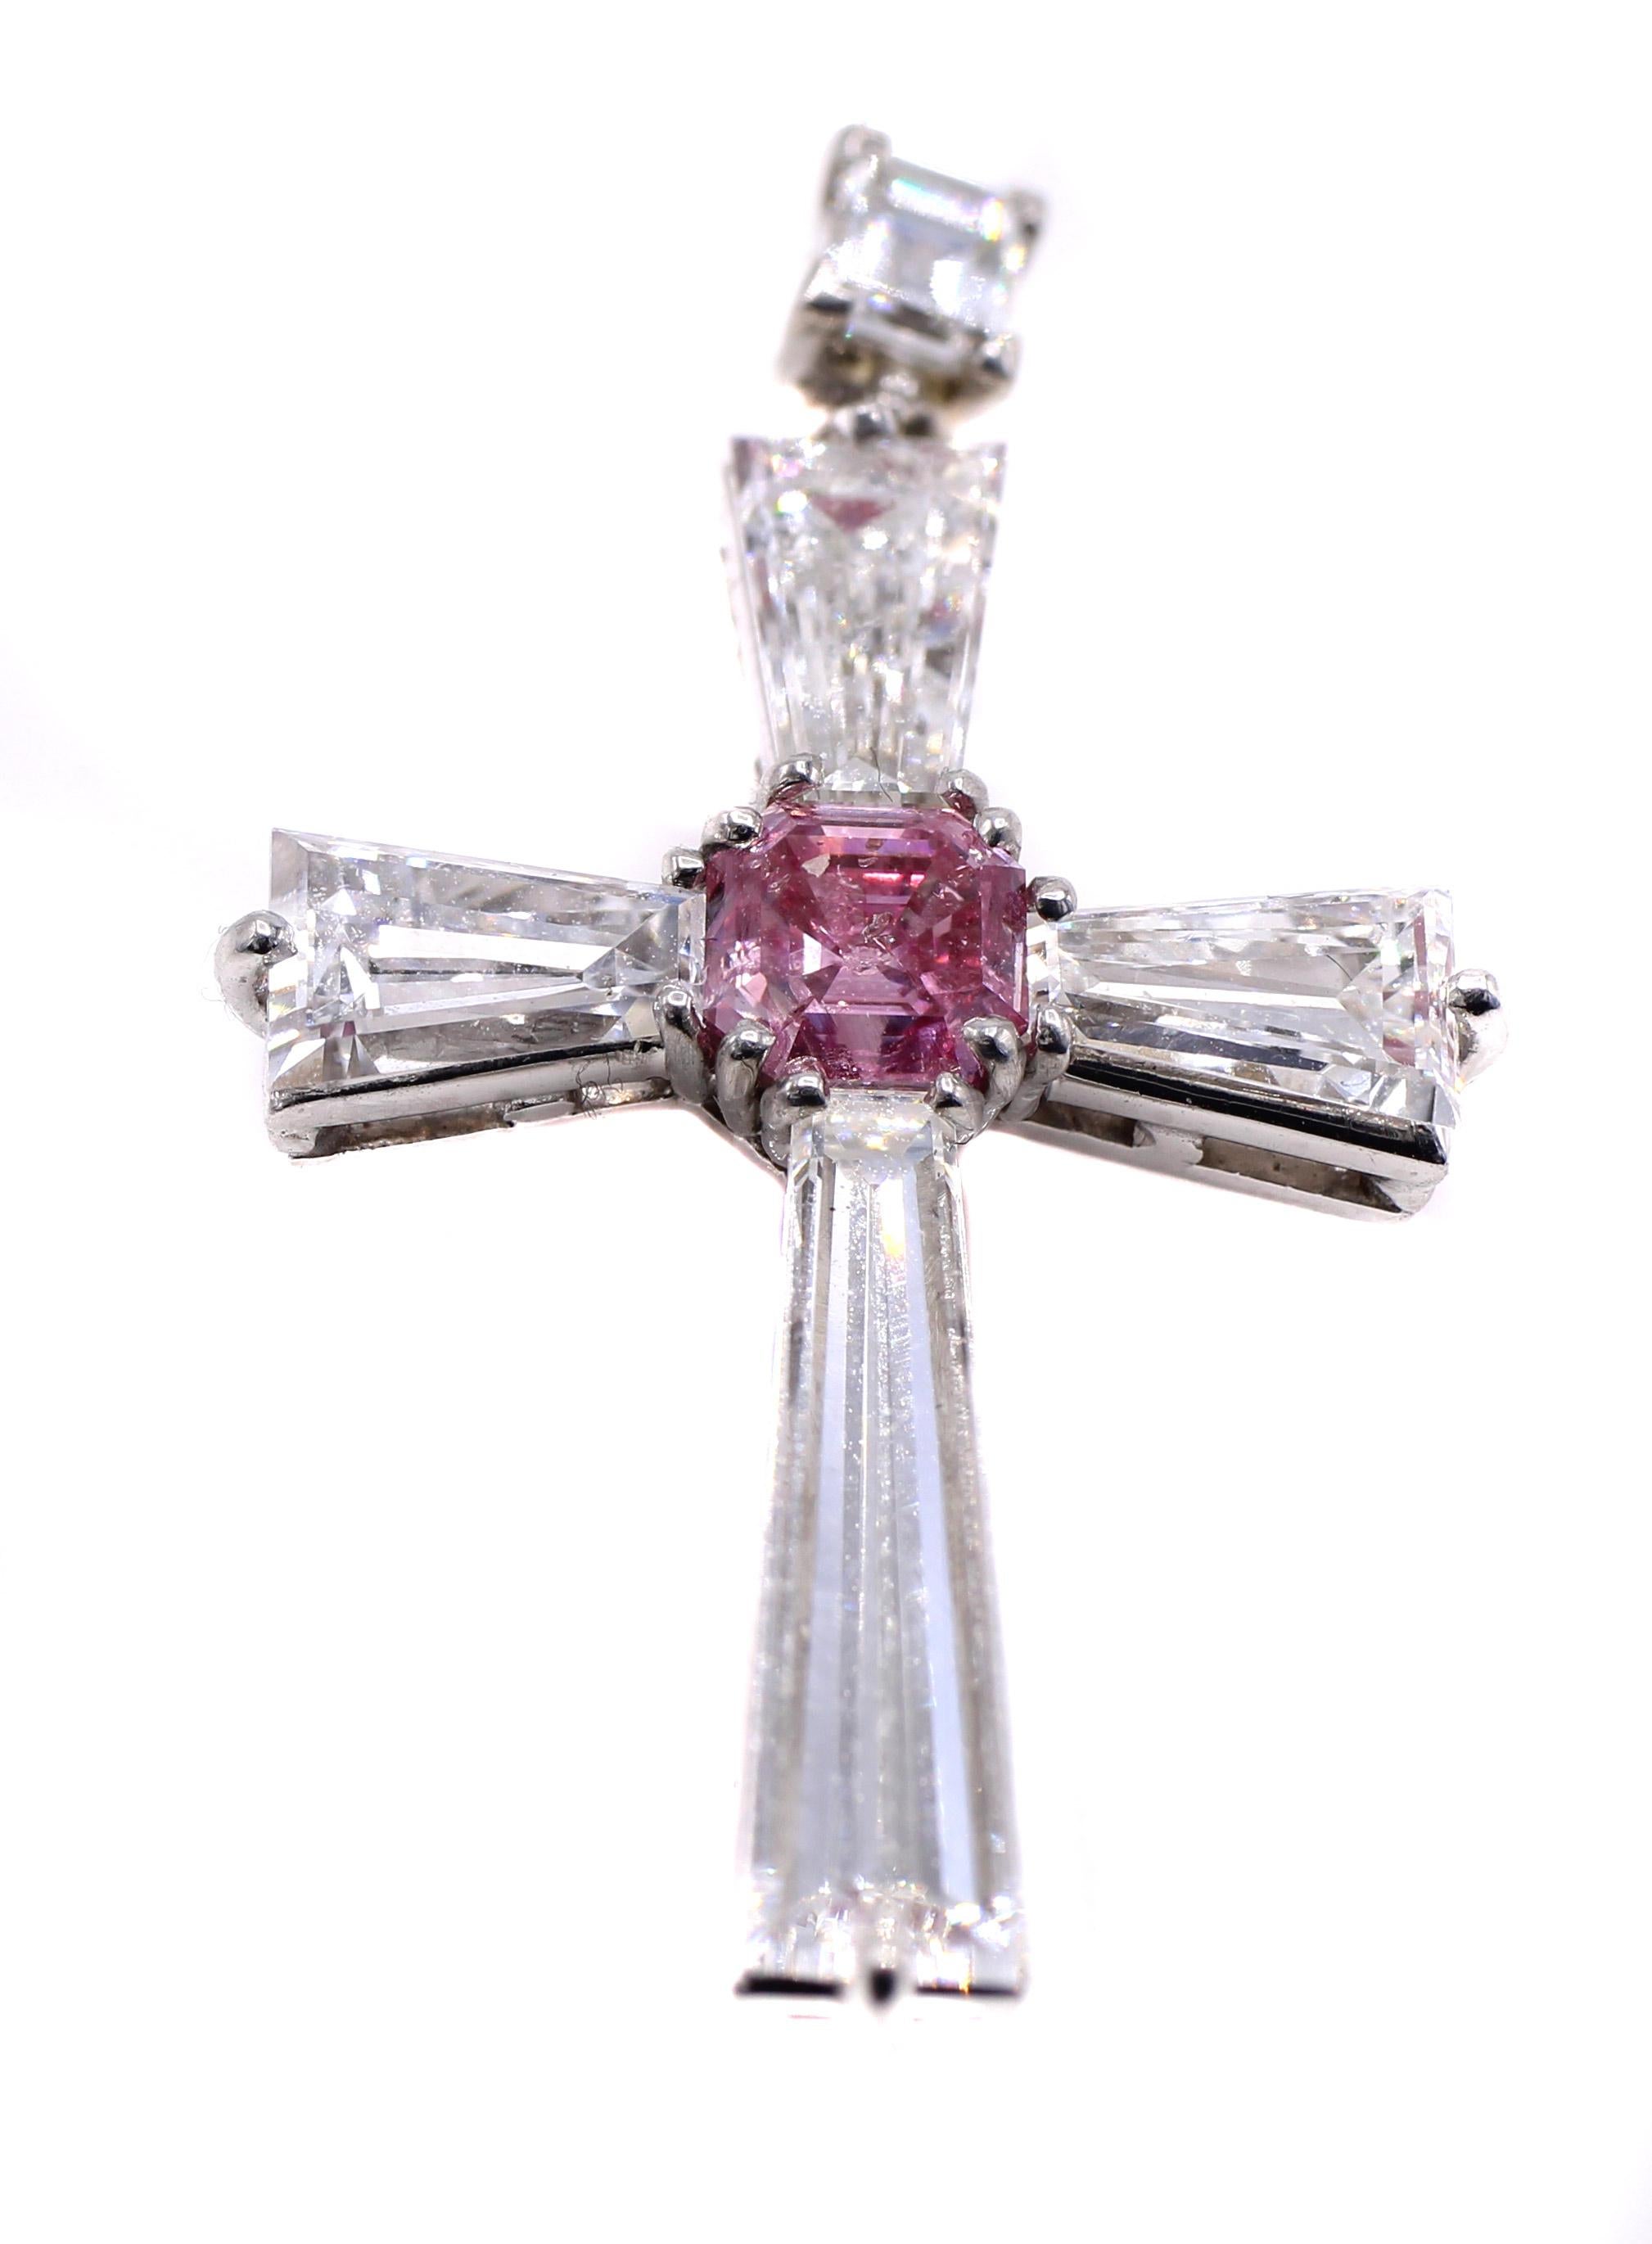 This rare and unique platinum cross pendant features a Natural Fancy Intense Purplish Pink radiant cut diamond weighing weighing 0.55 carats, accompanied by a report from the GIA. Embellished by 3 very large and white tapered baguettes with the